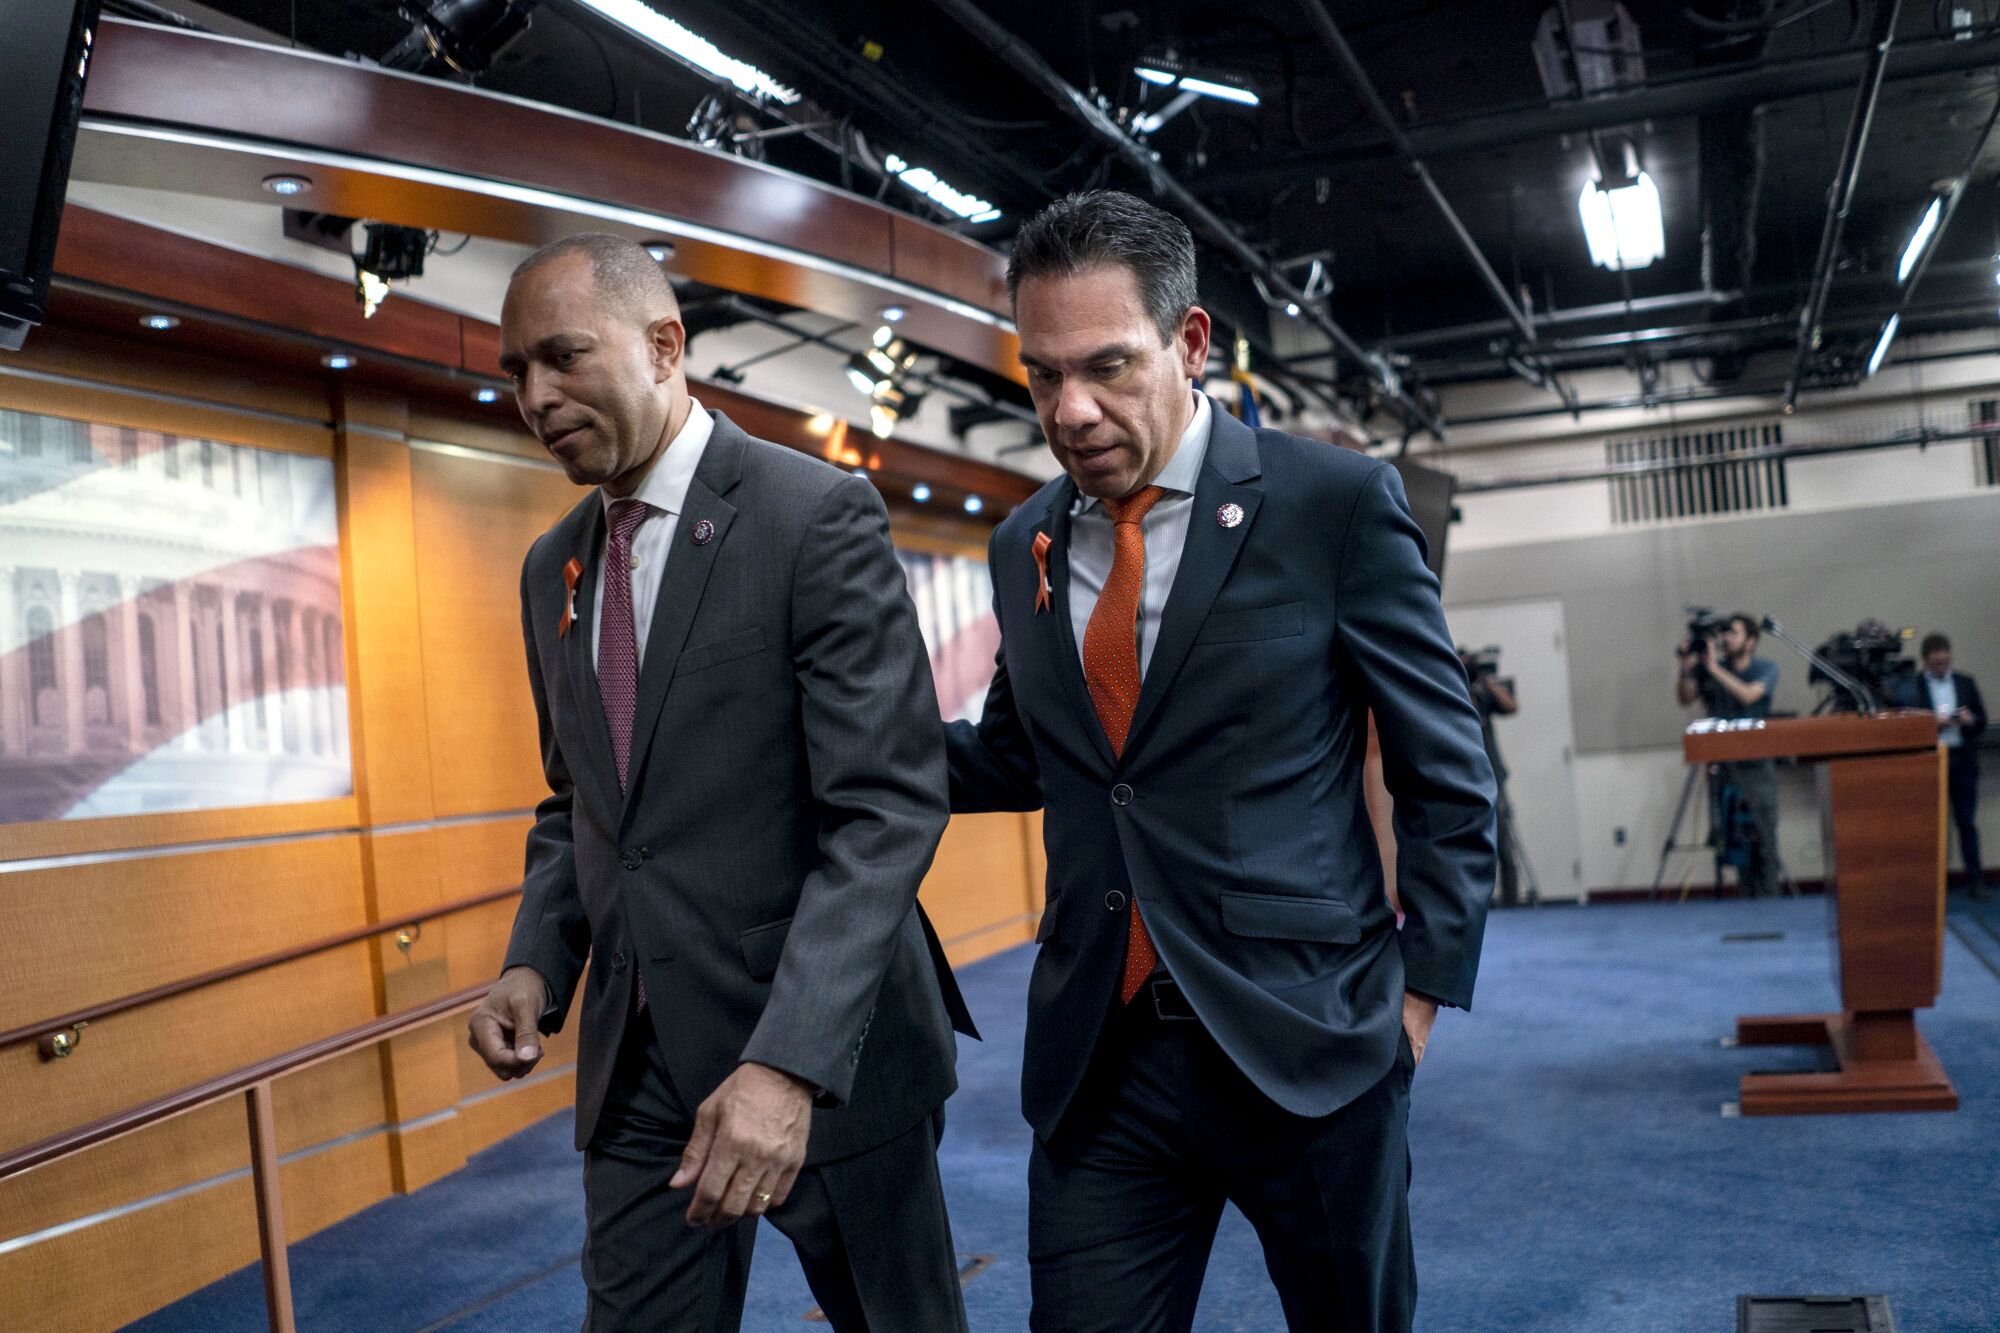 Pete Aguilar, right, places his hand on the back of Hakeem Jeffries as they walk together near a press-conference stage